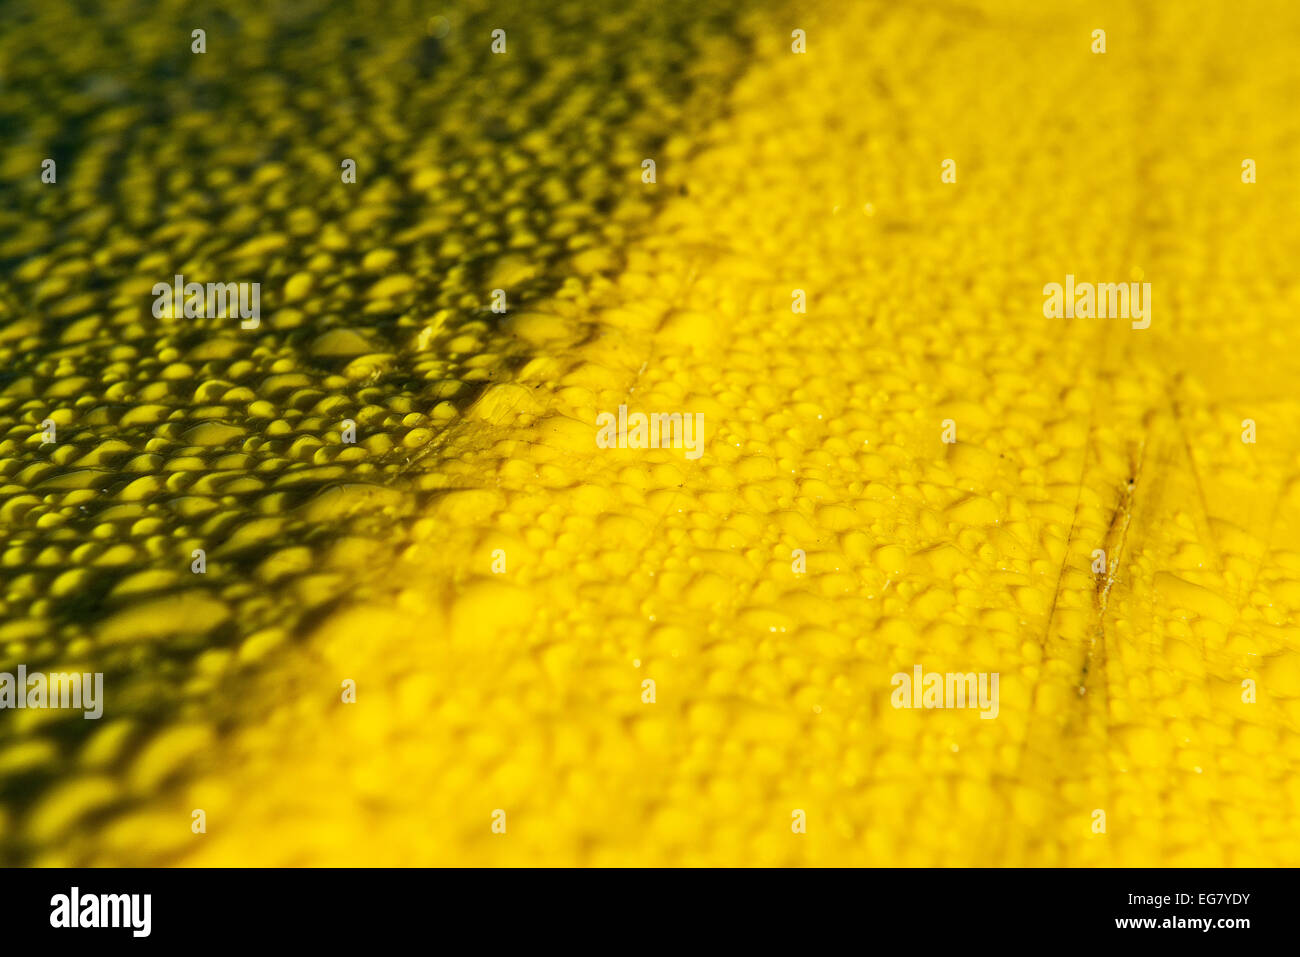 Water beading up on a yellow plastic surface. Stock Photo